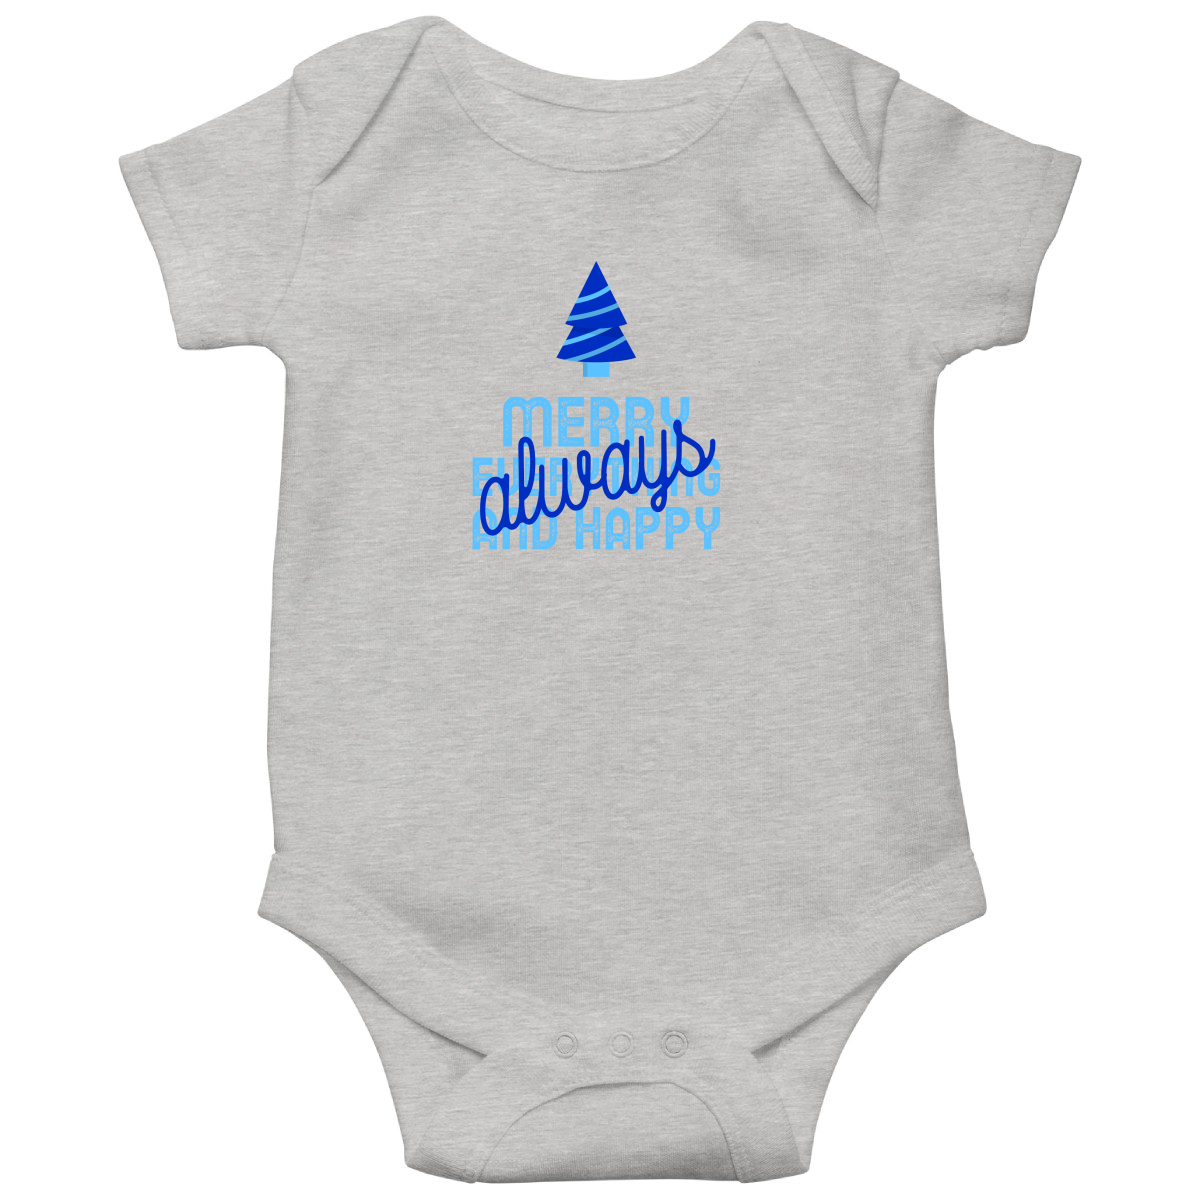 Always Merry Everything and Happy Baby Bodysuits